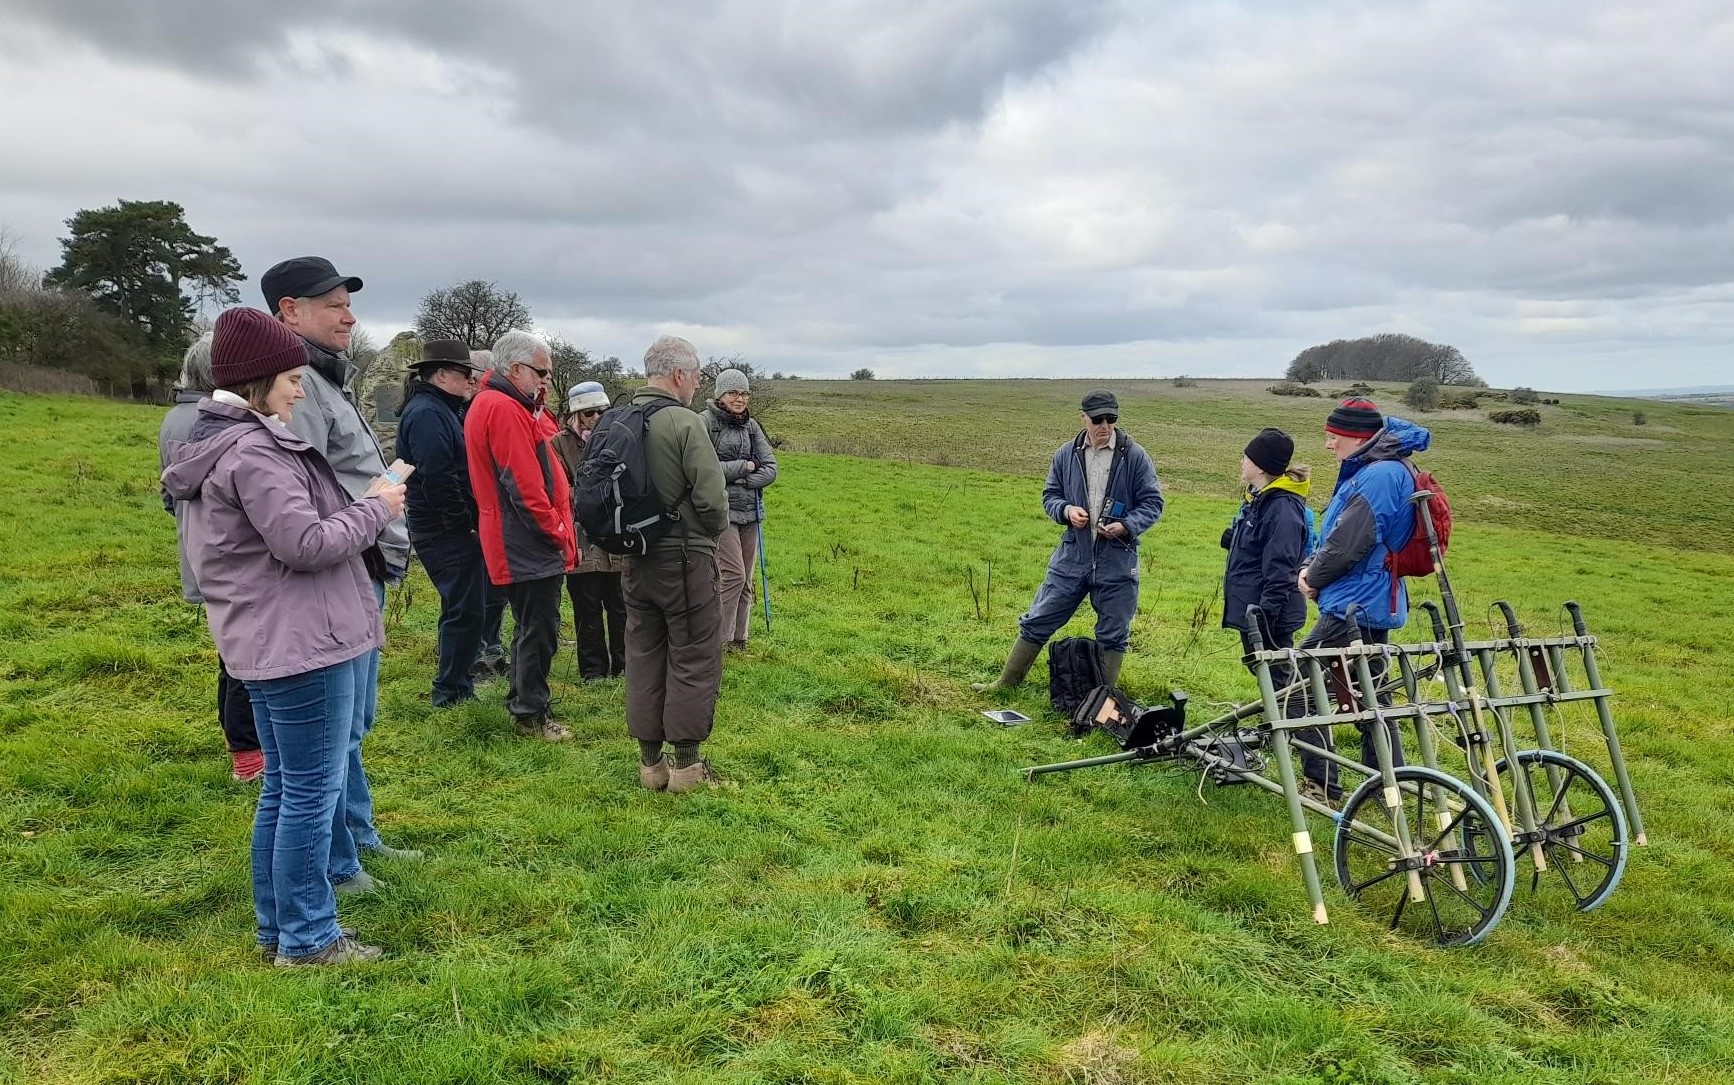 A photograph of a group of people in a field. They are listening to speaker who is demonstrating some archaeological survey equipment.